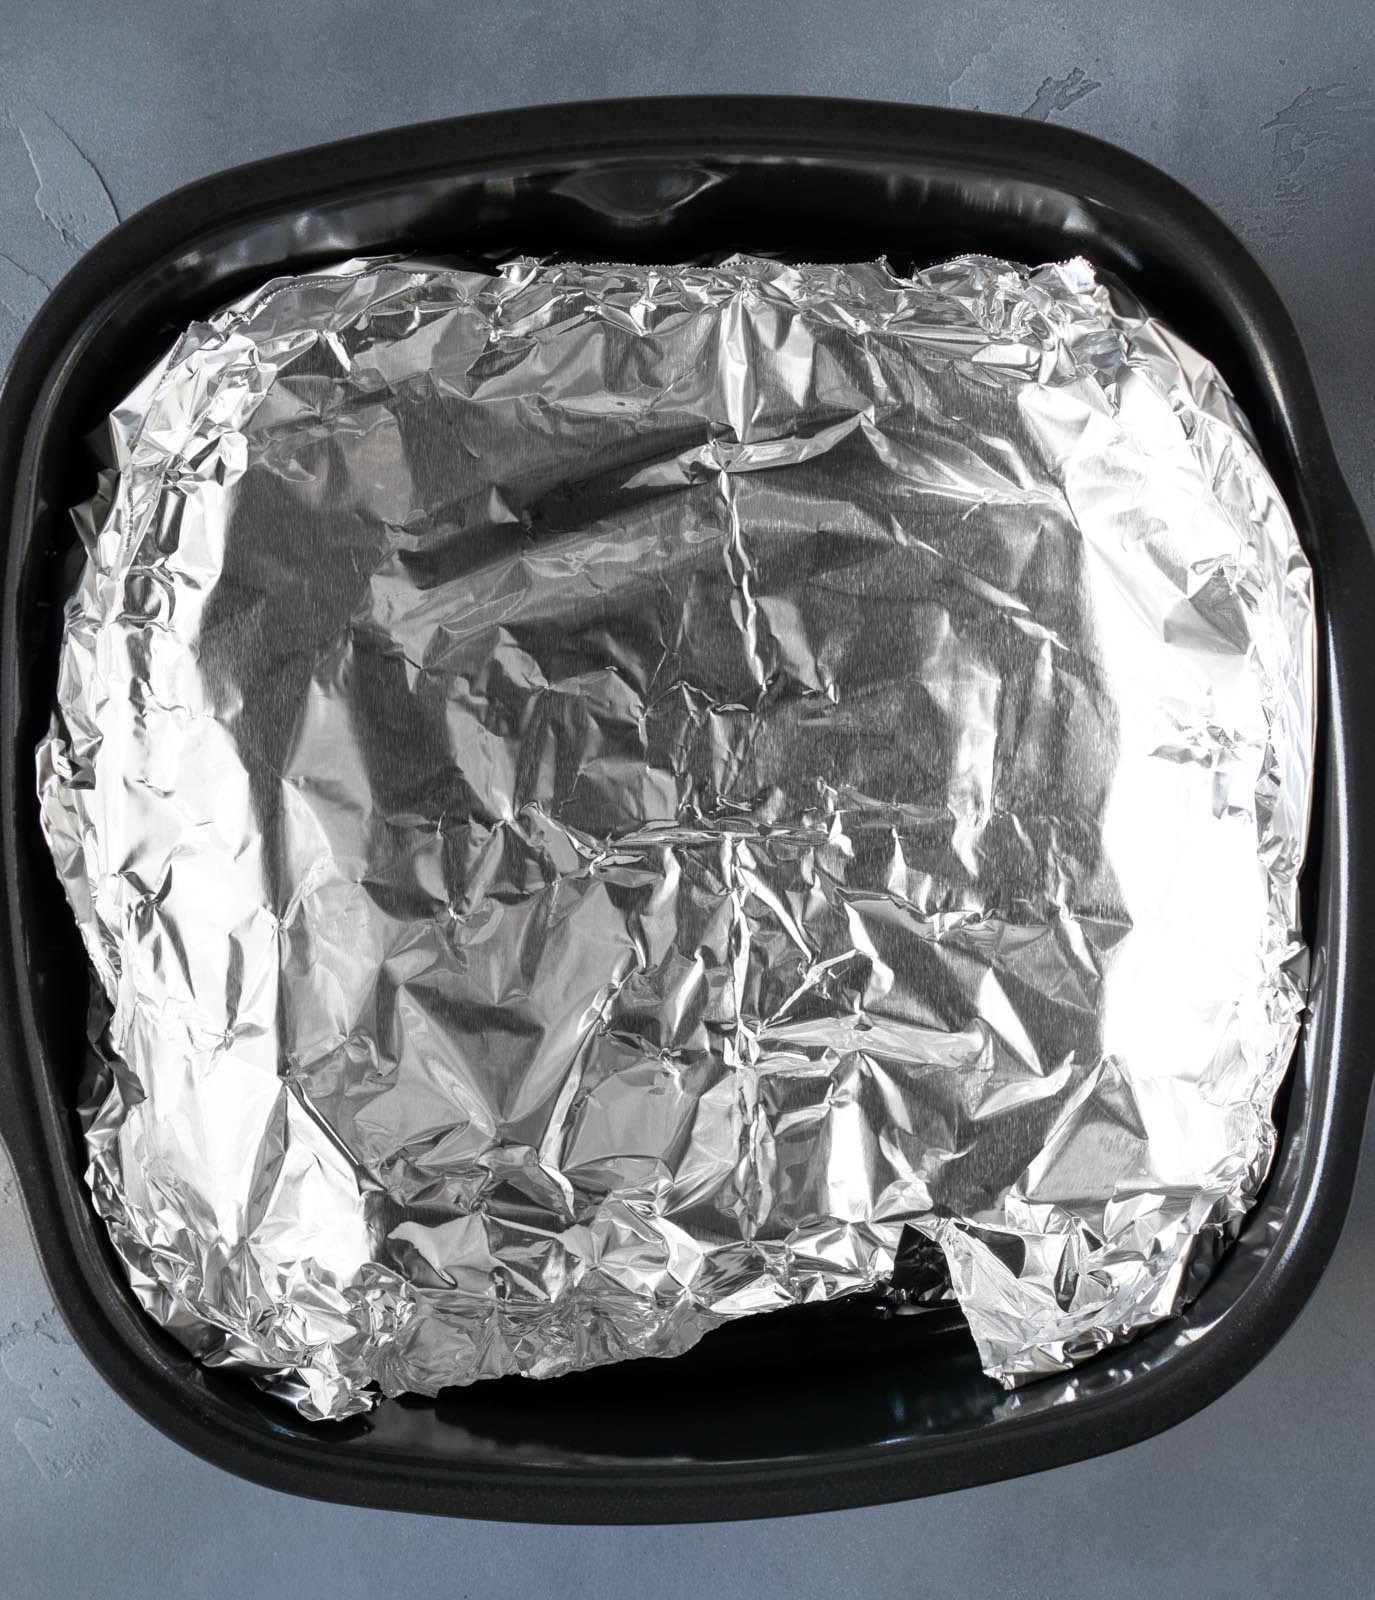 Can You Put Foil in an Air Fryer?